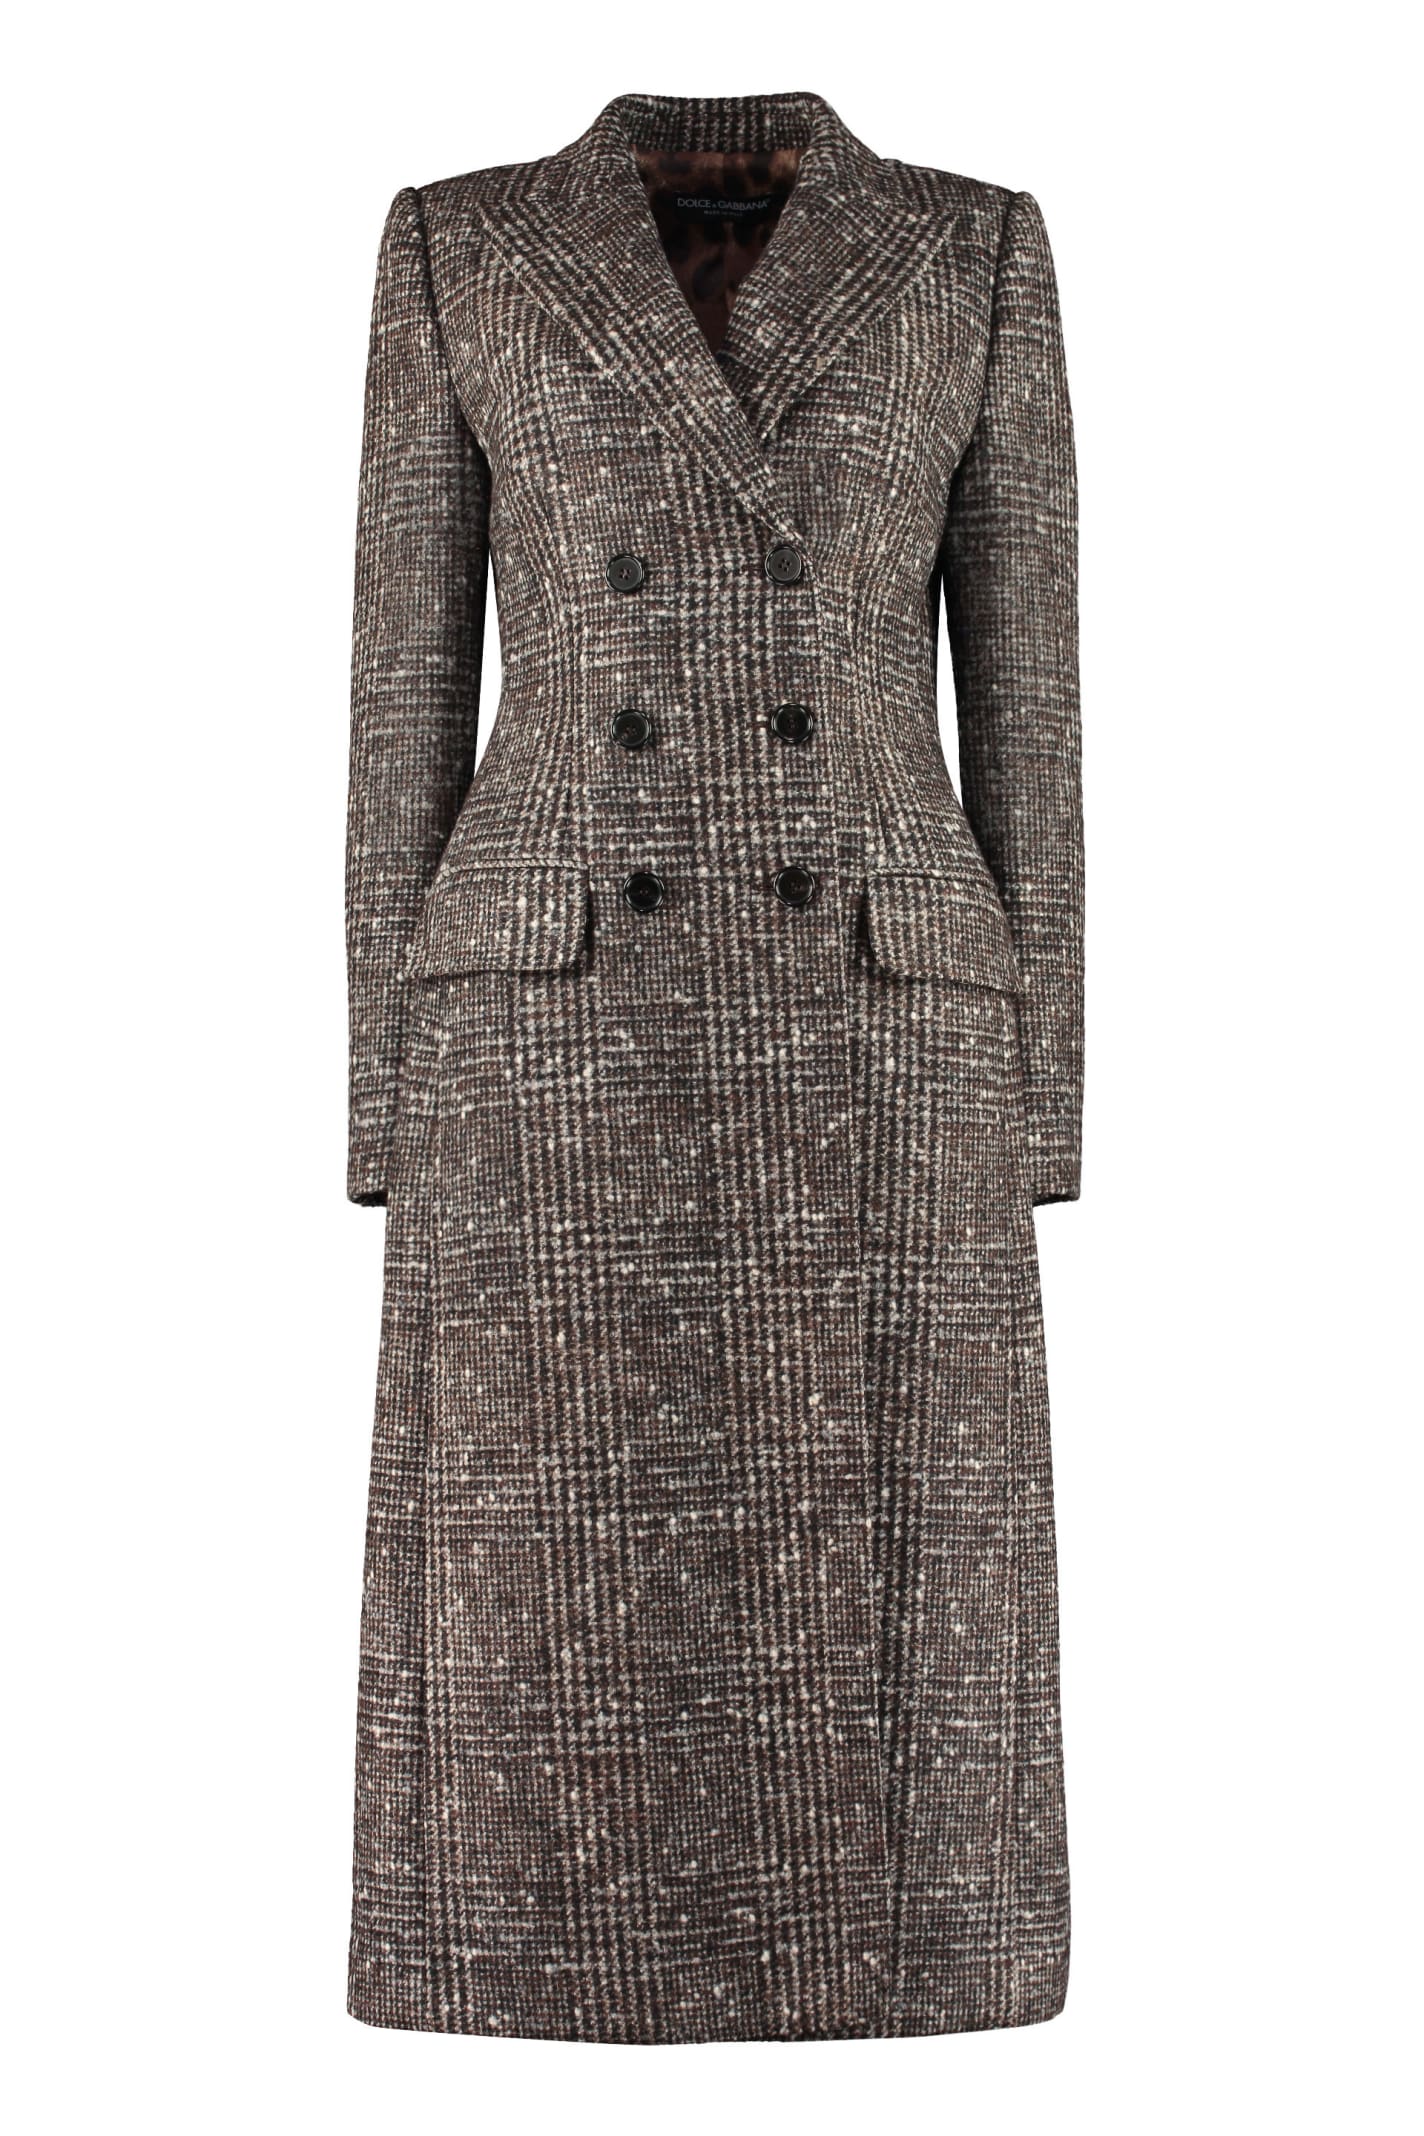 Dolce & Gabbana Double-breasted Wool Coat